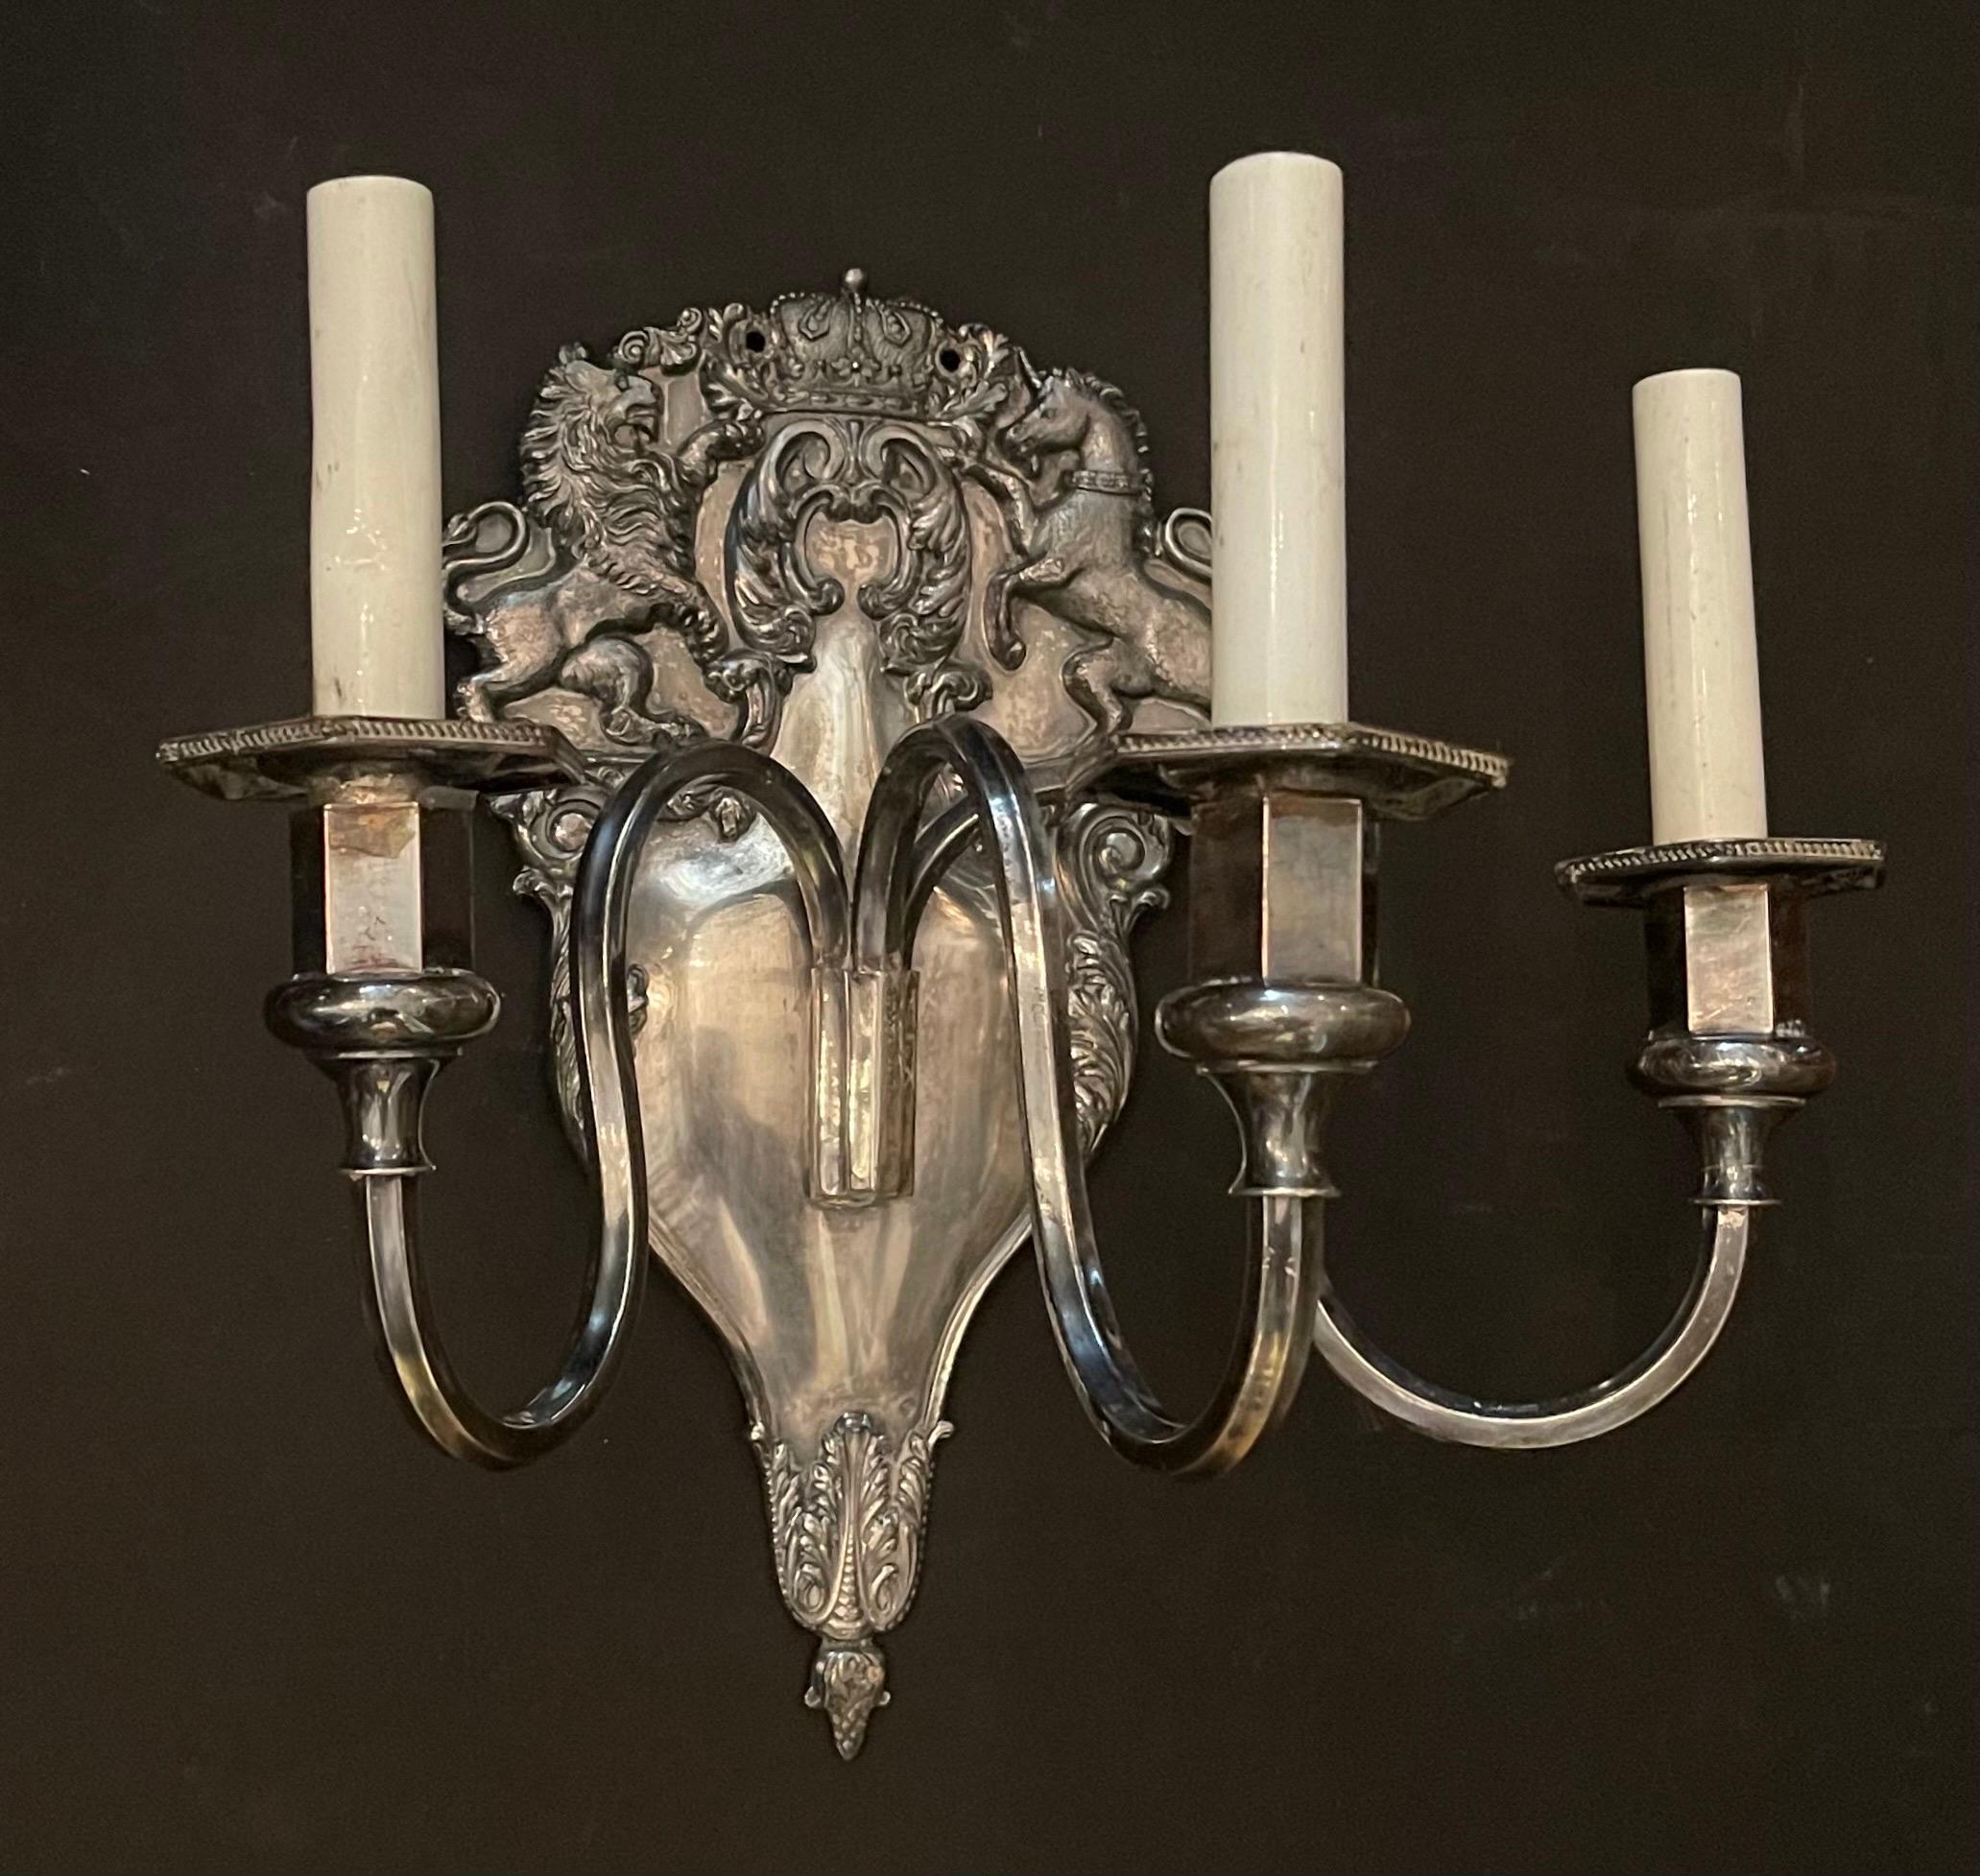 A fine pair of sheffield English silver plated lion, unicorns, horse shield back 3 candelabra light sconces.